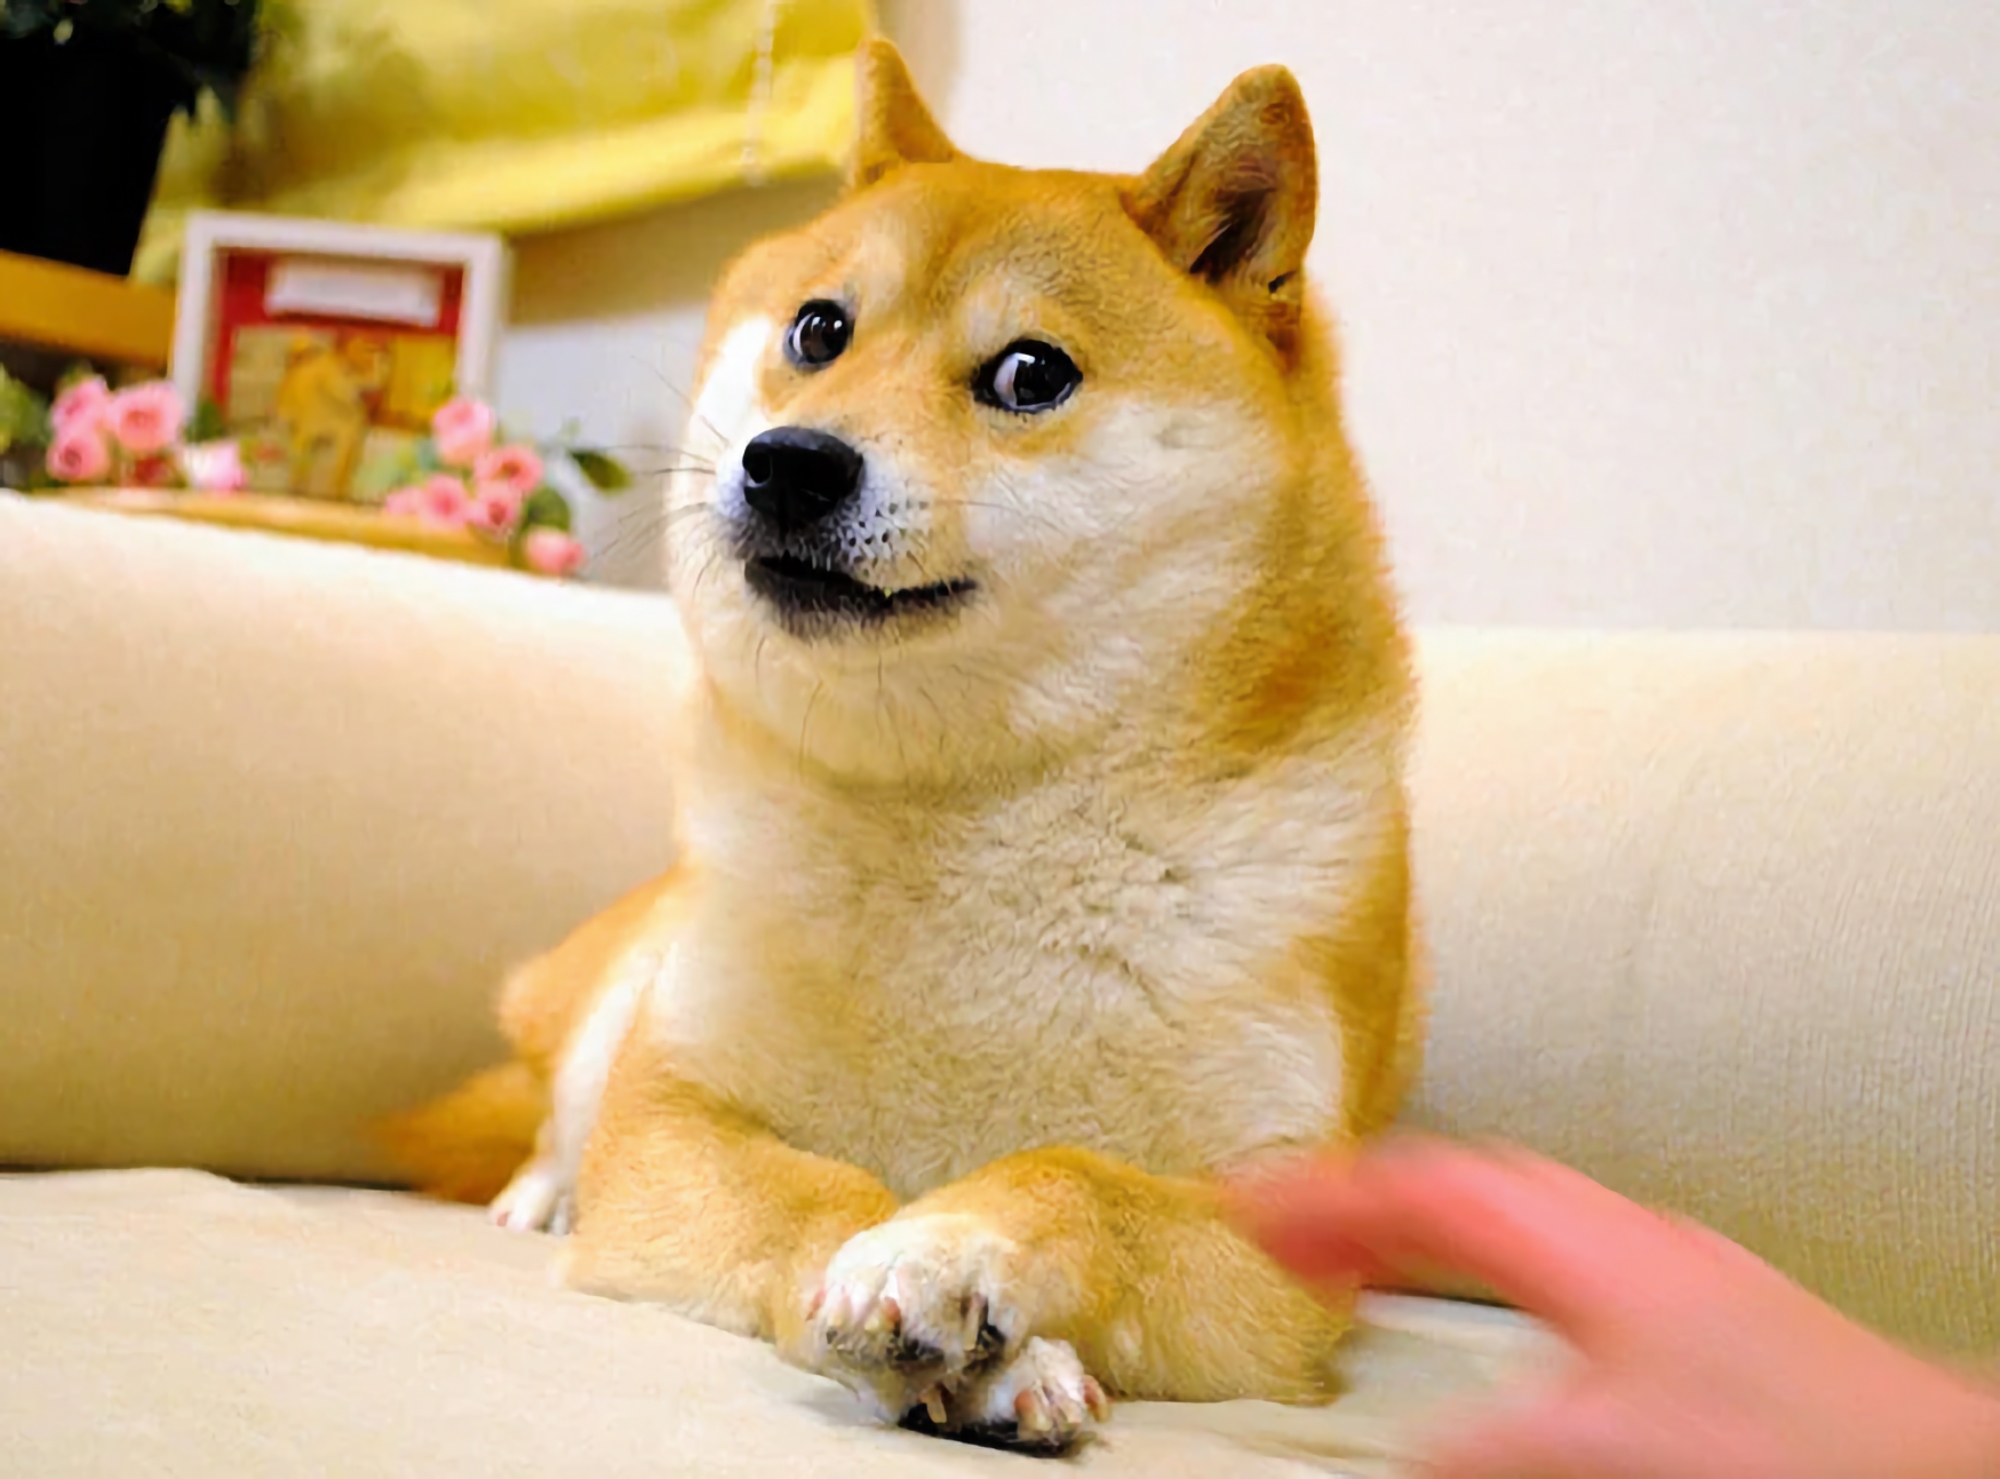 Kabosu the dog from the Doge meme has died in his 18th year of life